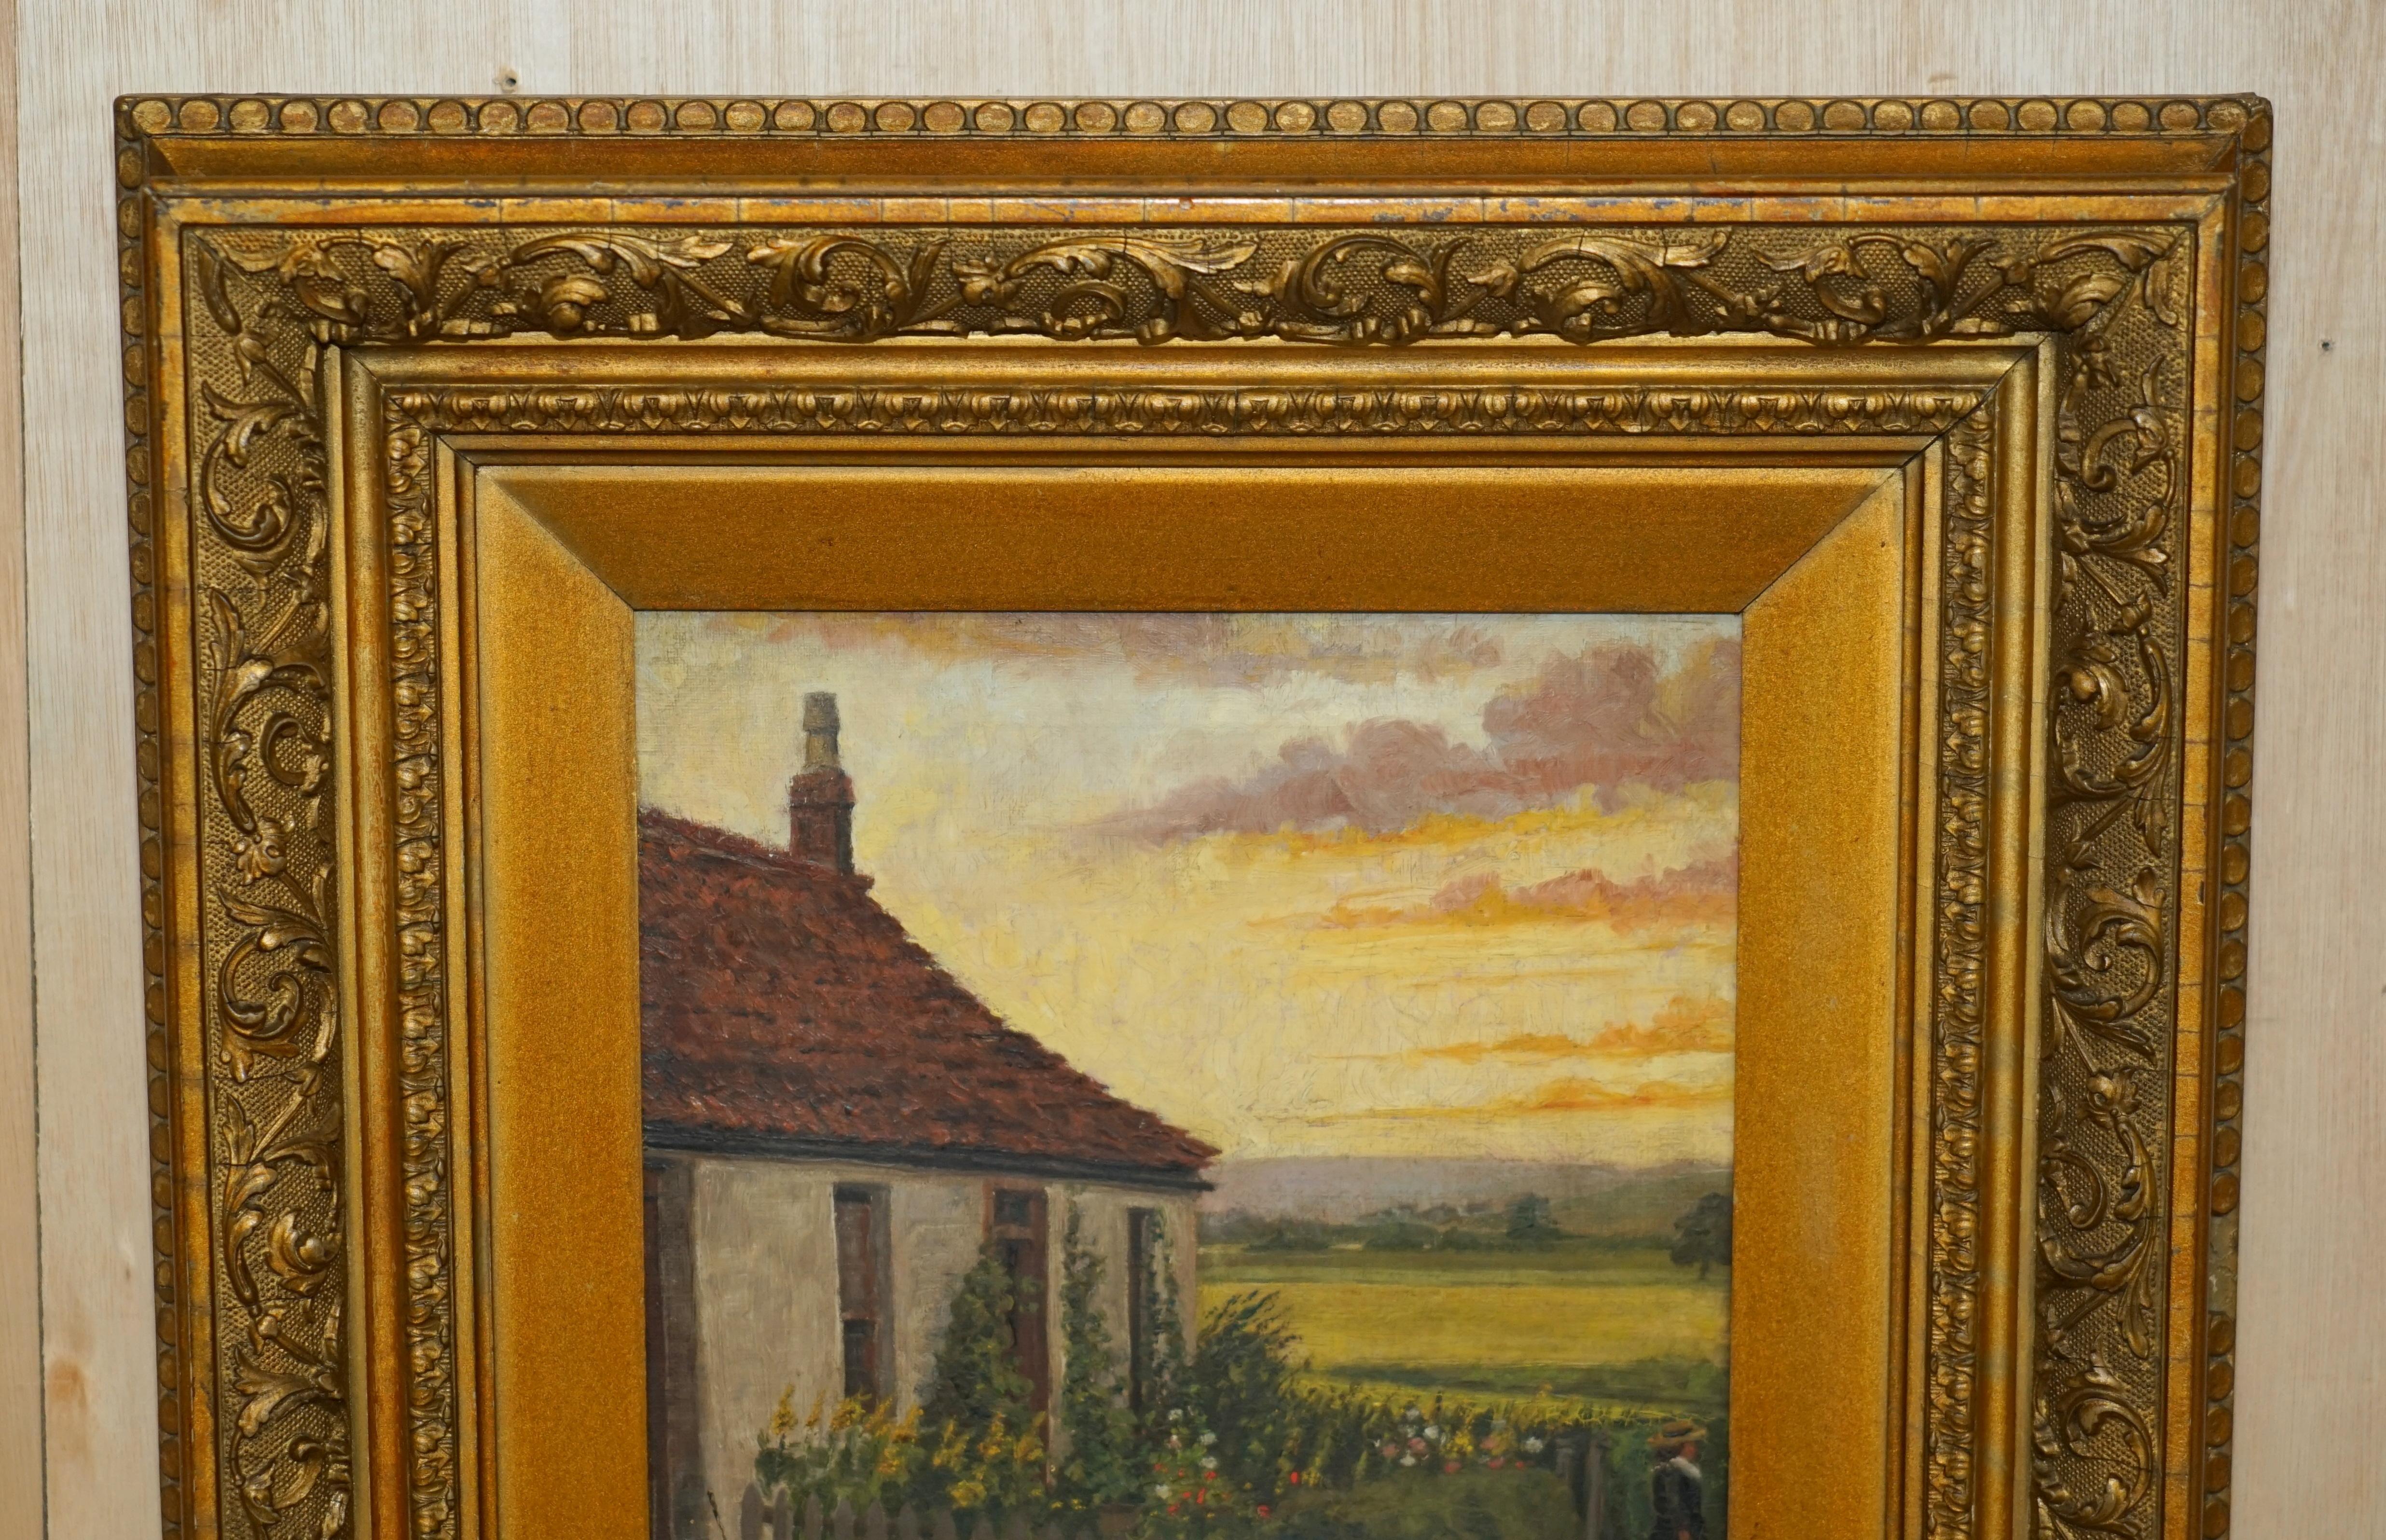 Hand-Painted EXQUISITE 1894 SiGNED & DATED OIL ON CANVAS IN ORIGINAL FRAME OF FARM COTTAGE